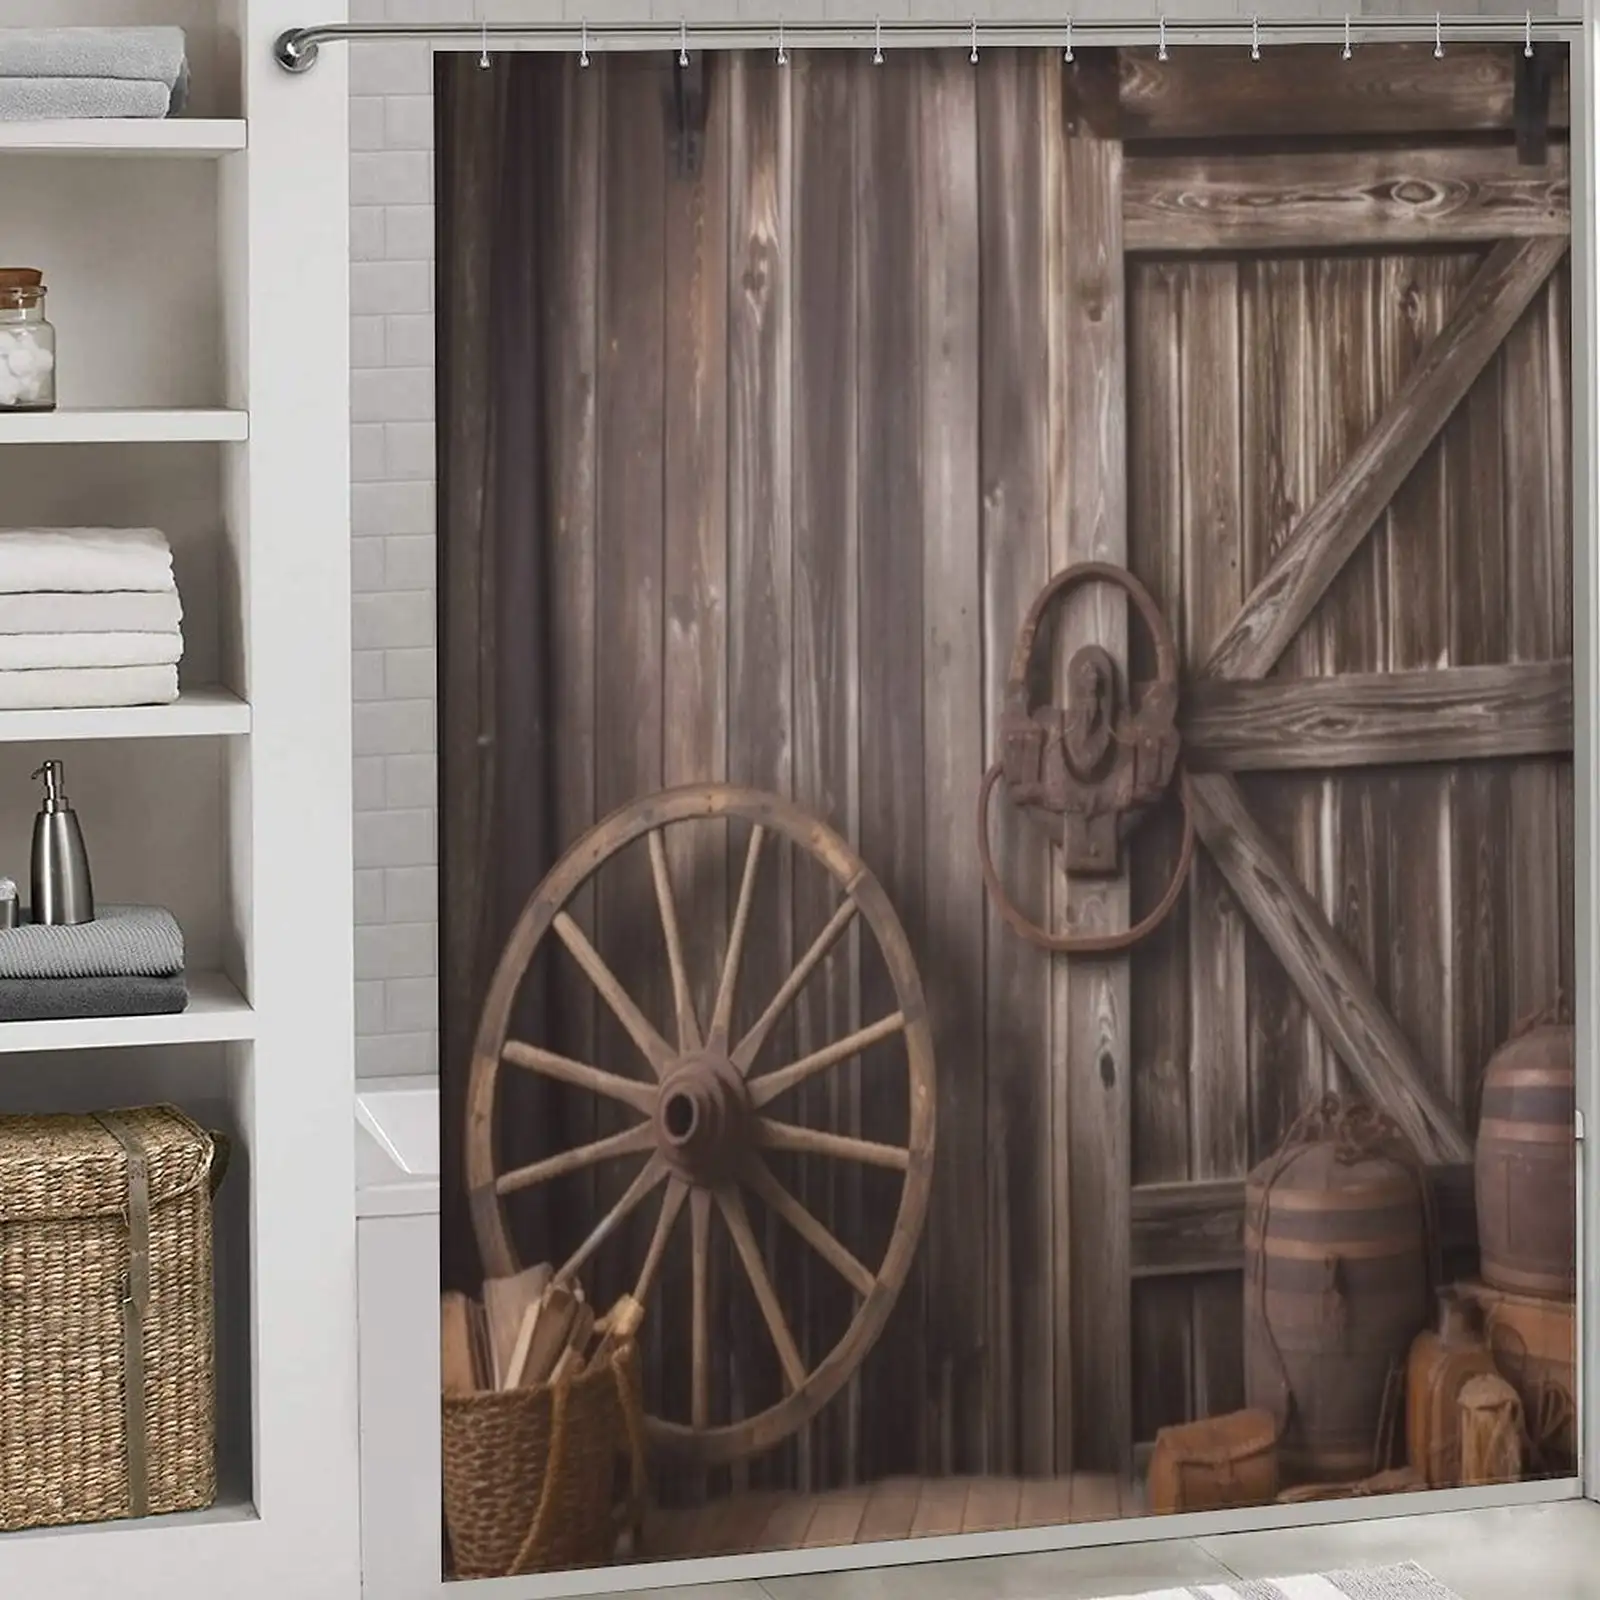 Add a rustic touch to your vintage bathroom decor with this shower curtain featuring a wagon wheel.